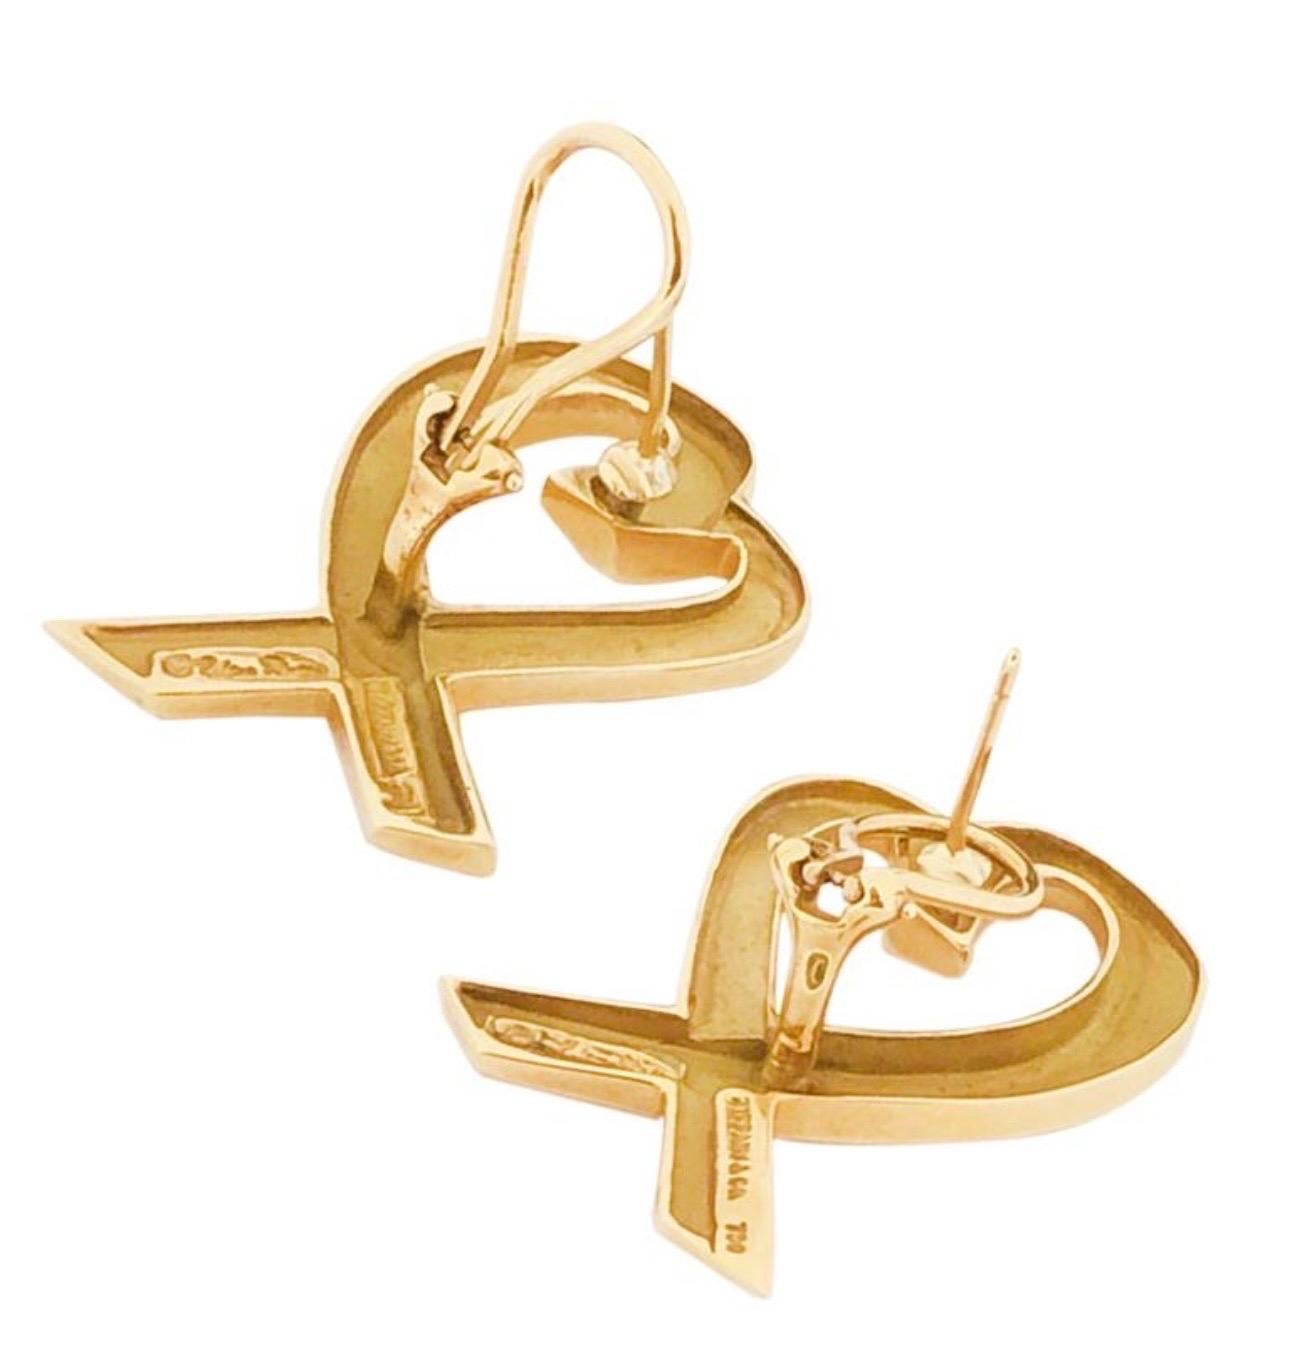 A true classic authentic pair of earrings by Tiffany & Co.
Tiffany & Co. Paloma Picasso large Yellow Gold Loving Heart Earrings
These authentic Tiffany & Co earrings are finely crafted from solid 18k Yellow gold. 

Material: Solid 18k Yellow gold 22